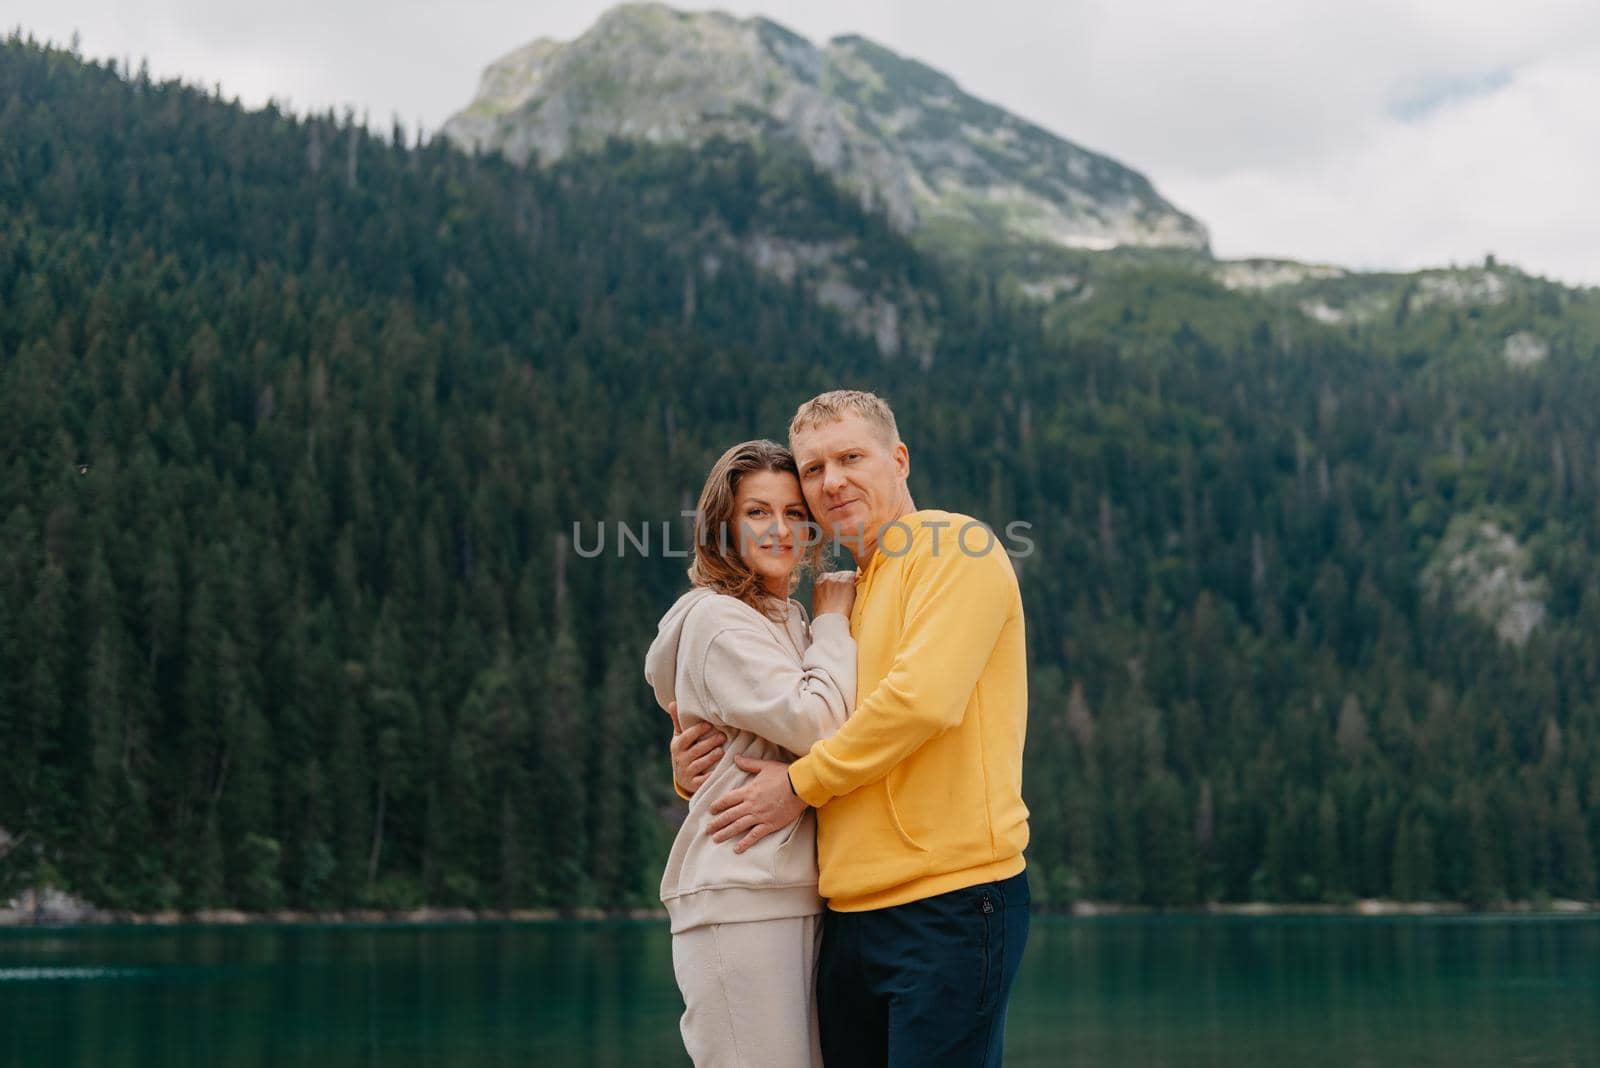 Romantic wedding couple in love standing on the stony shore of the lake, Scenic mountain view. The bride and groom. Beautiful caucasian couple hugging by the lake at summer sunny day. Honeymoon concept.